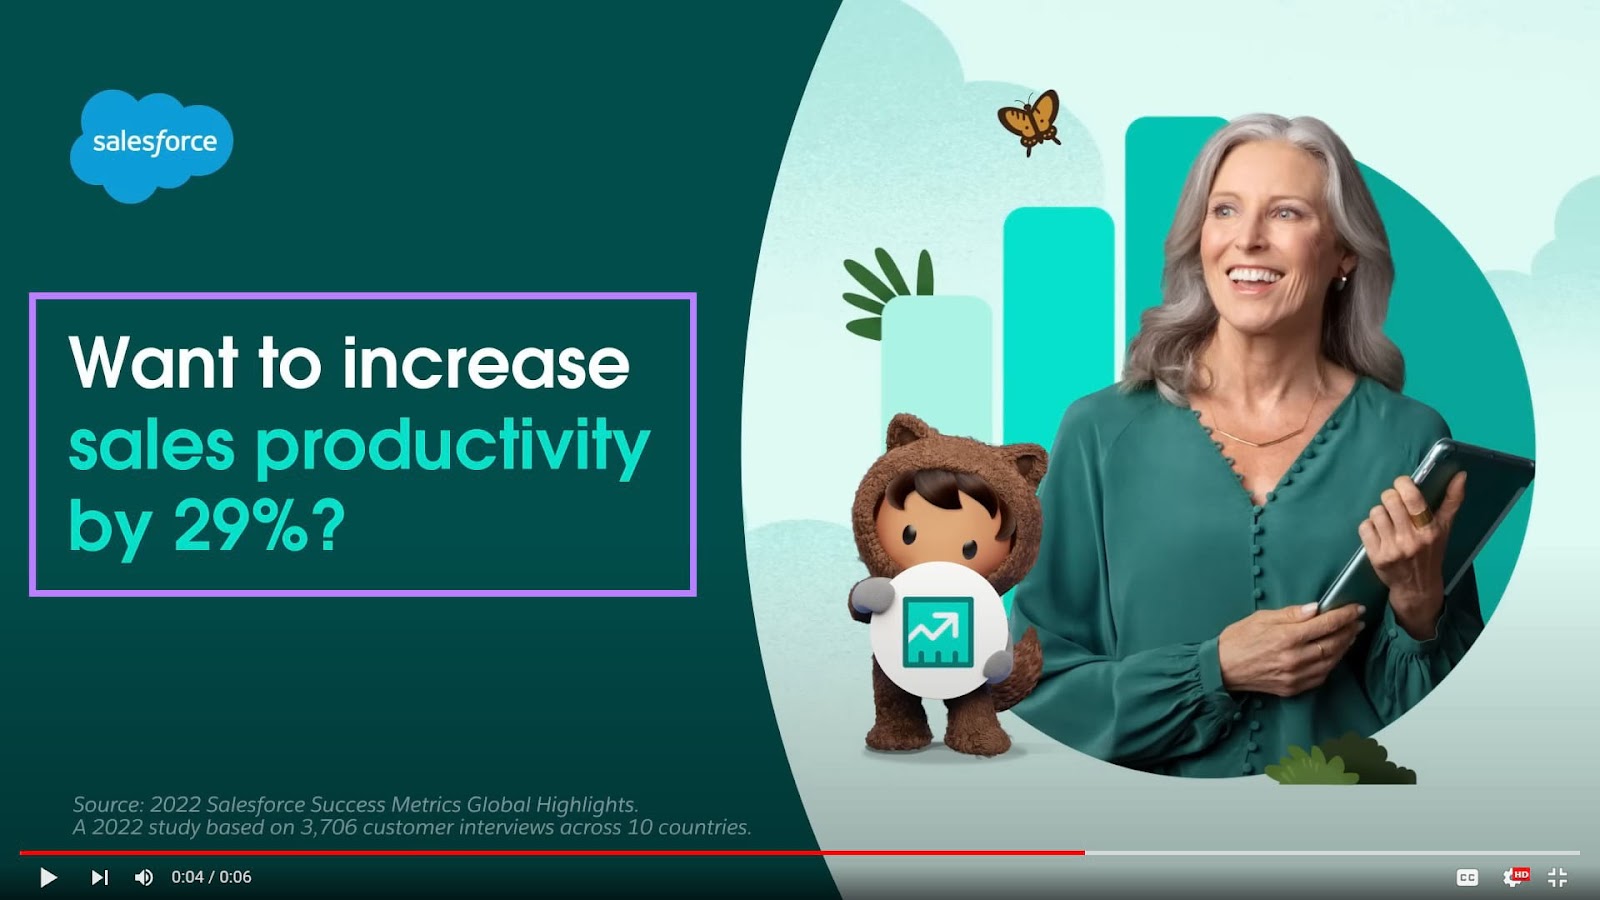 Salesforce' video ad screenshot with “Want to increase sales productivity by 29%?” copy